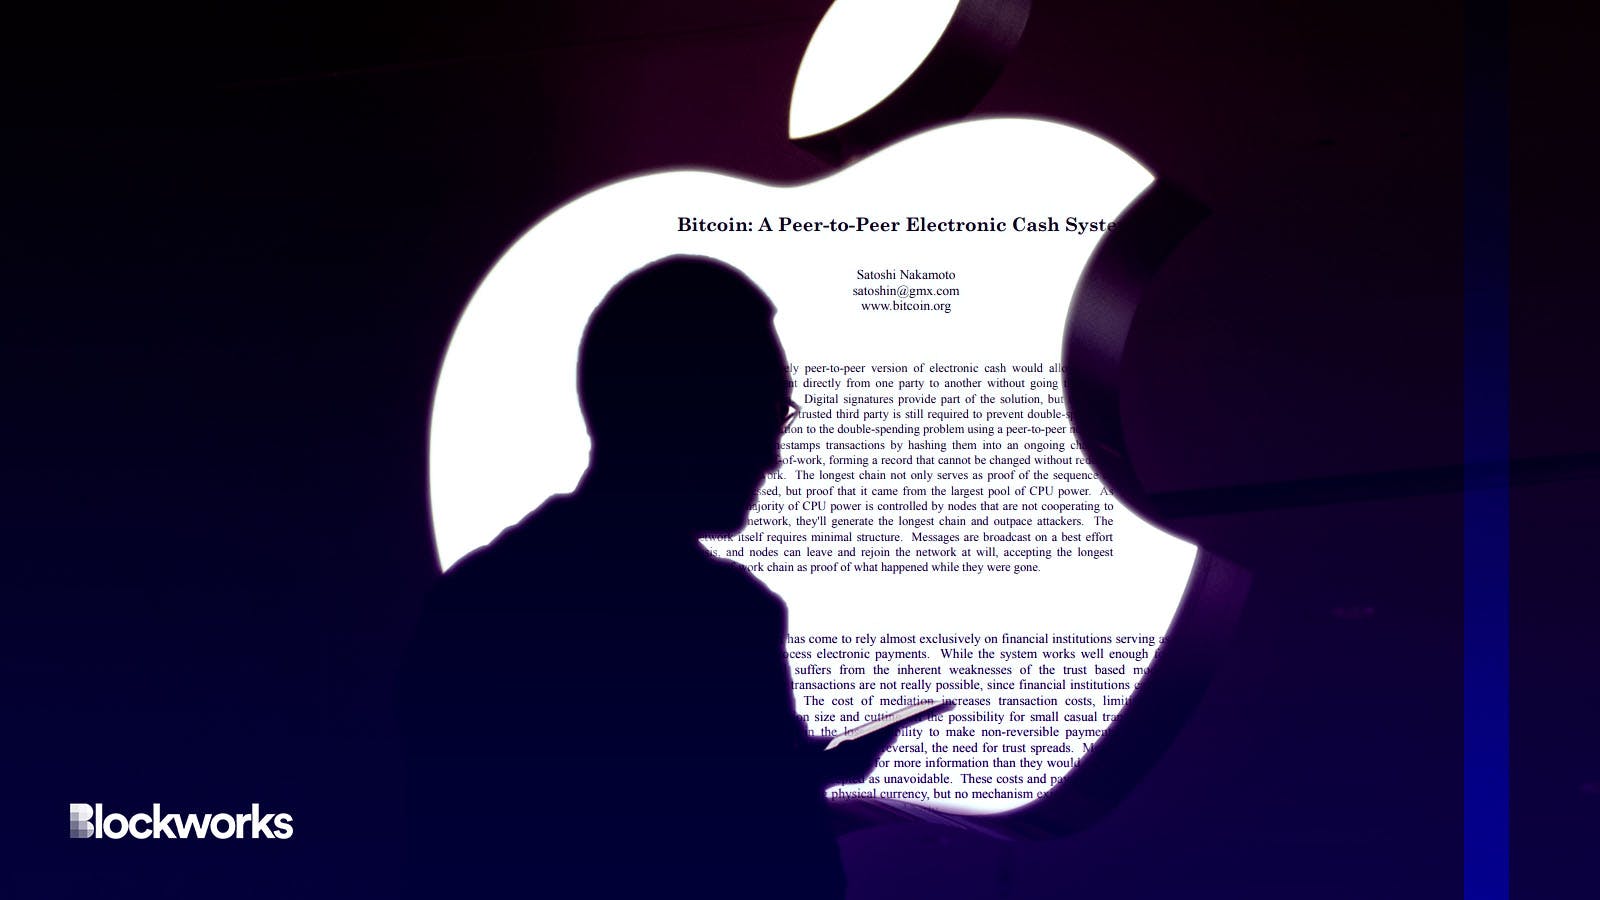 Bitcoin white paper is hidden away in macOS's system folder for